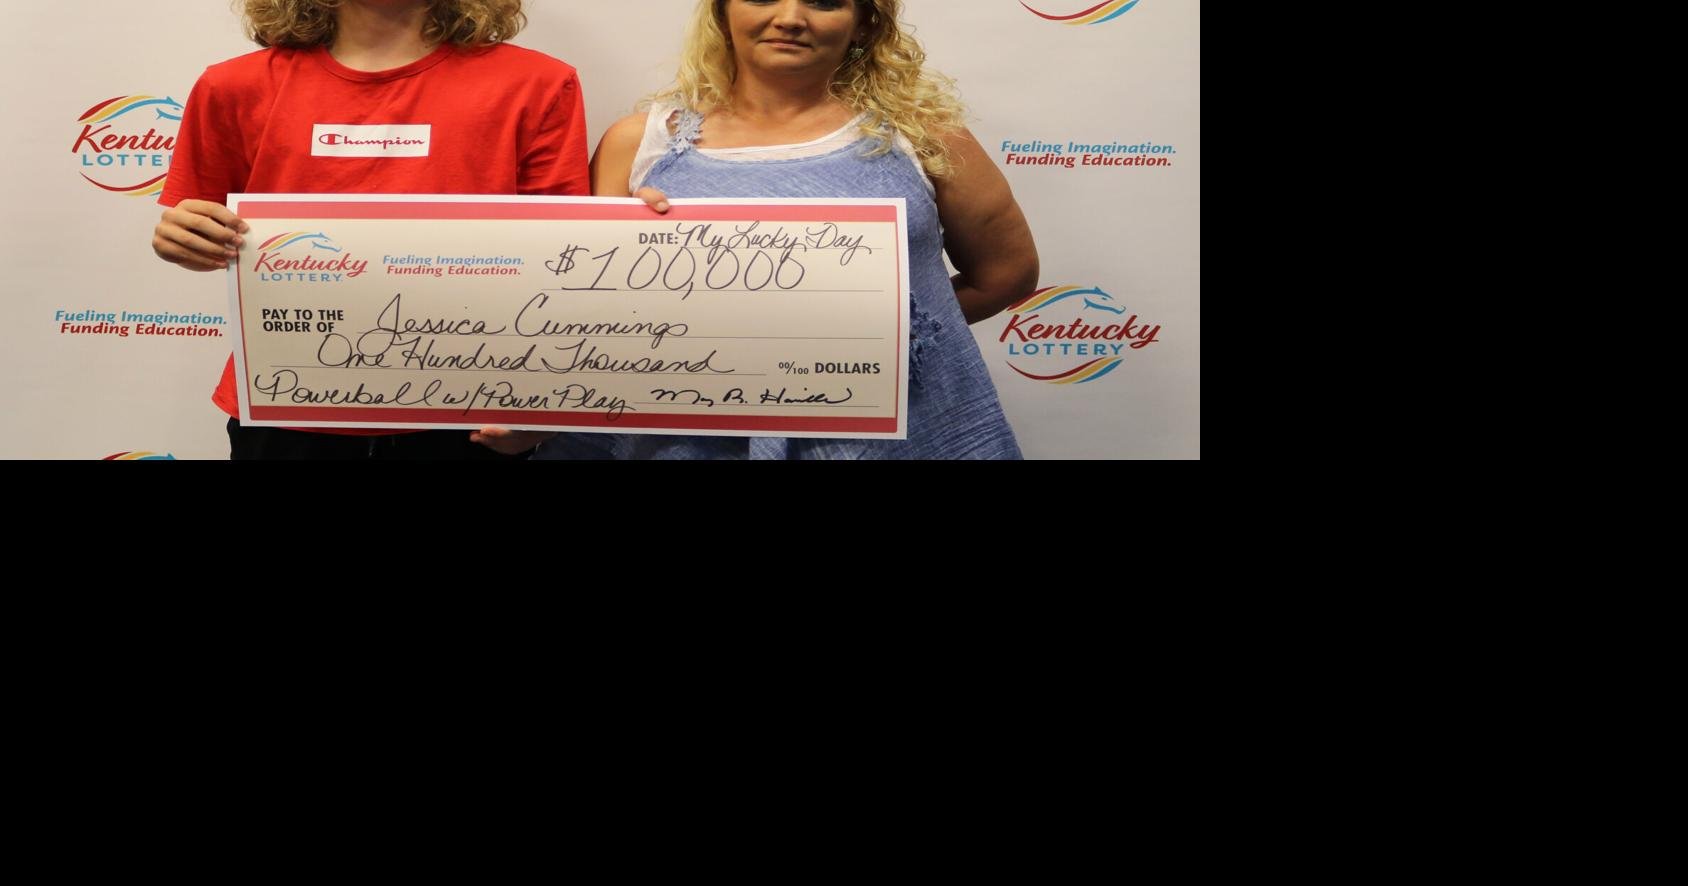 Leitchfield woman wins $100,000 with Kentucky Lottery ticket